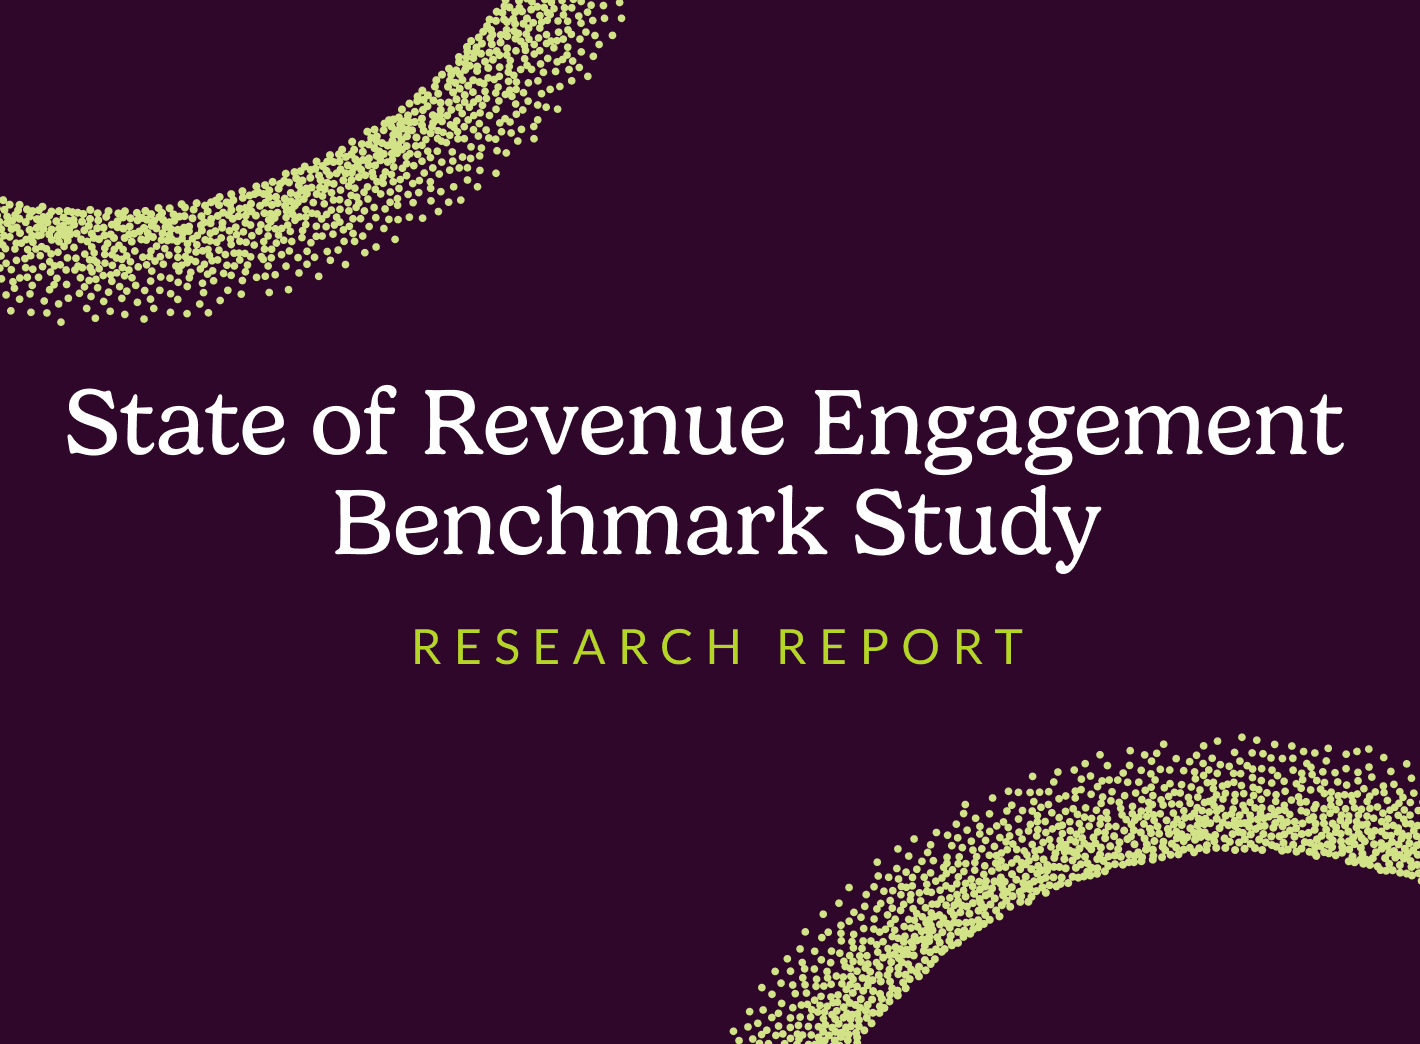 "State of revenue engagement benchmark study"